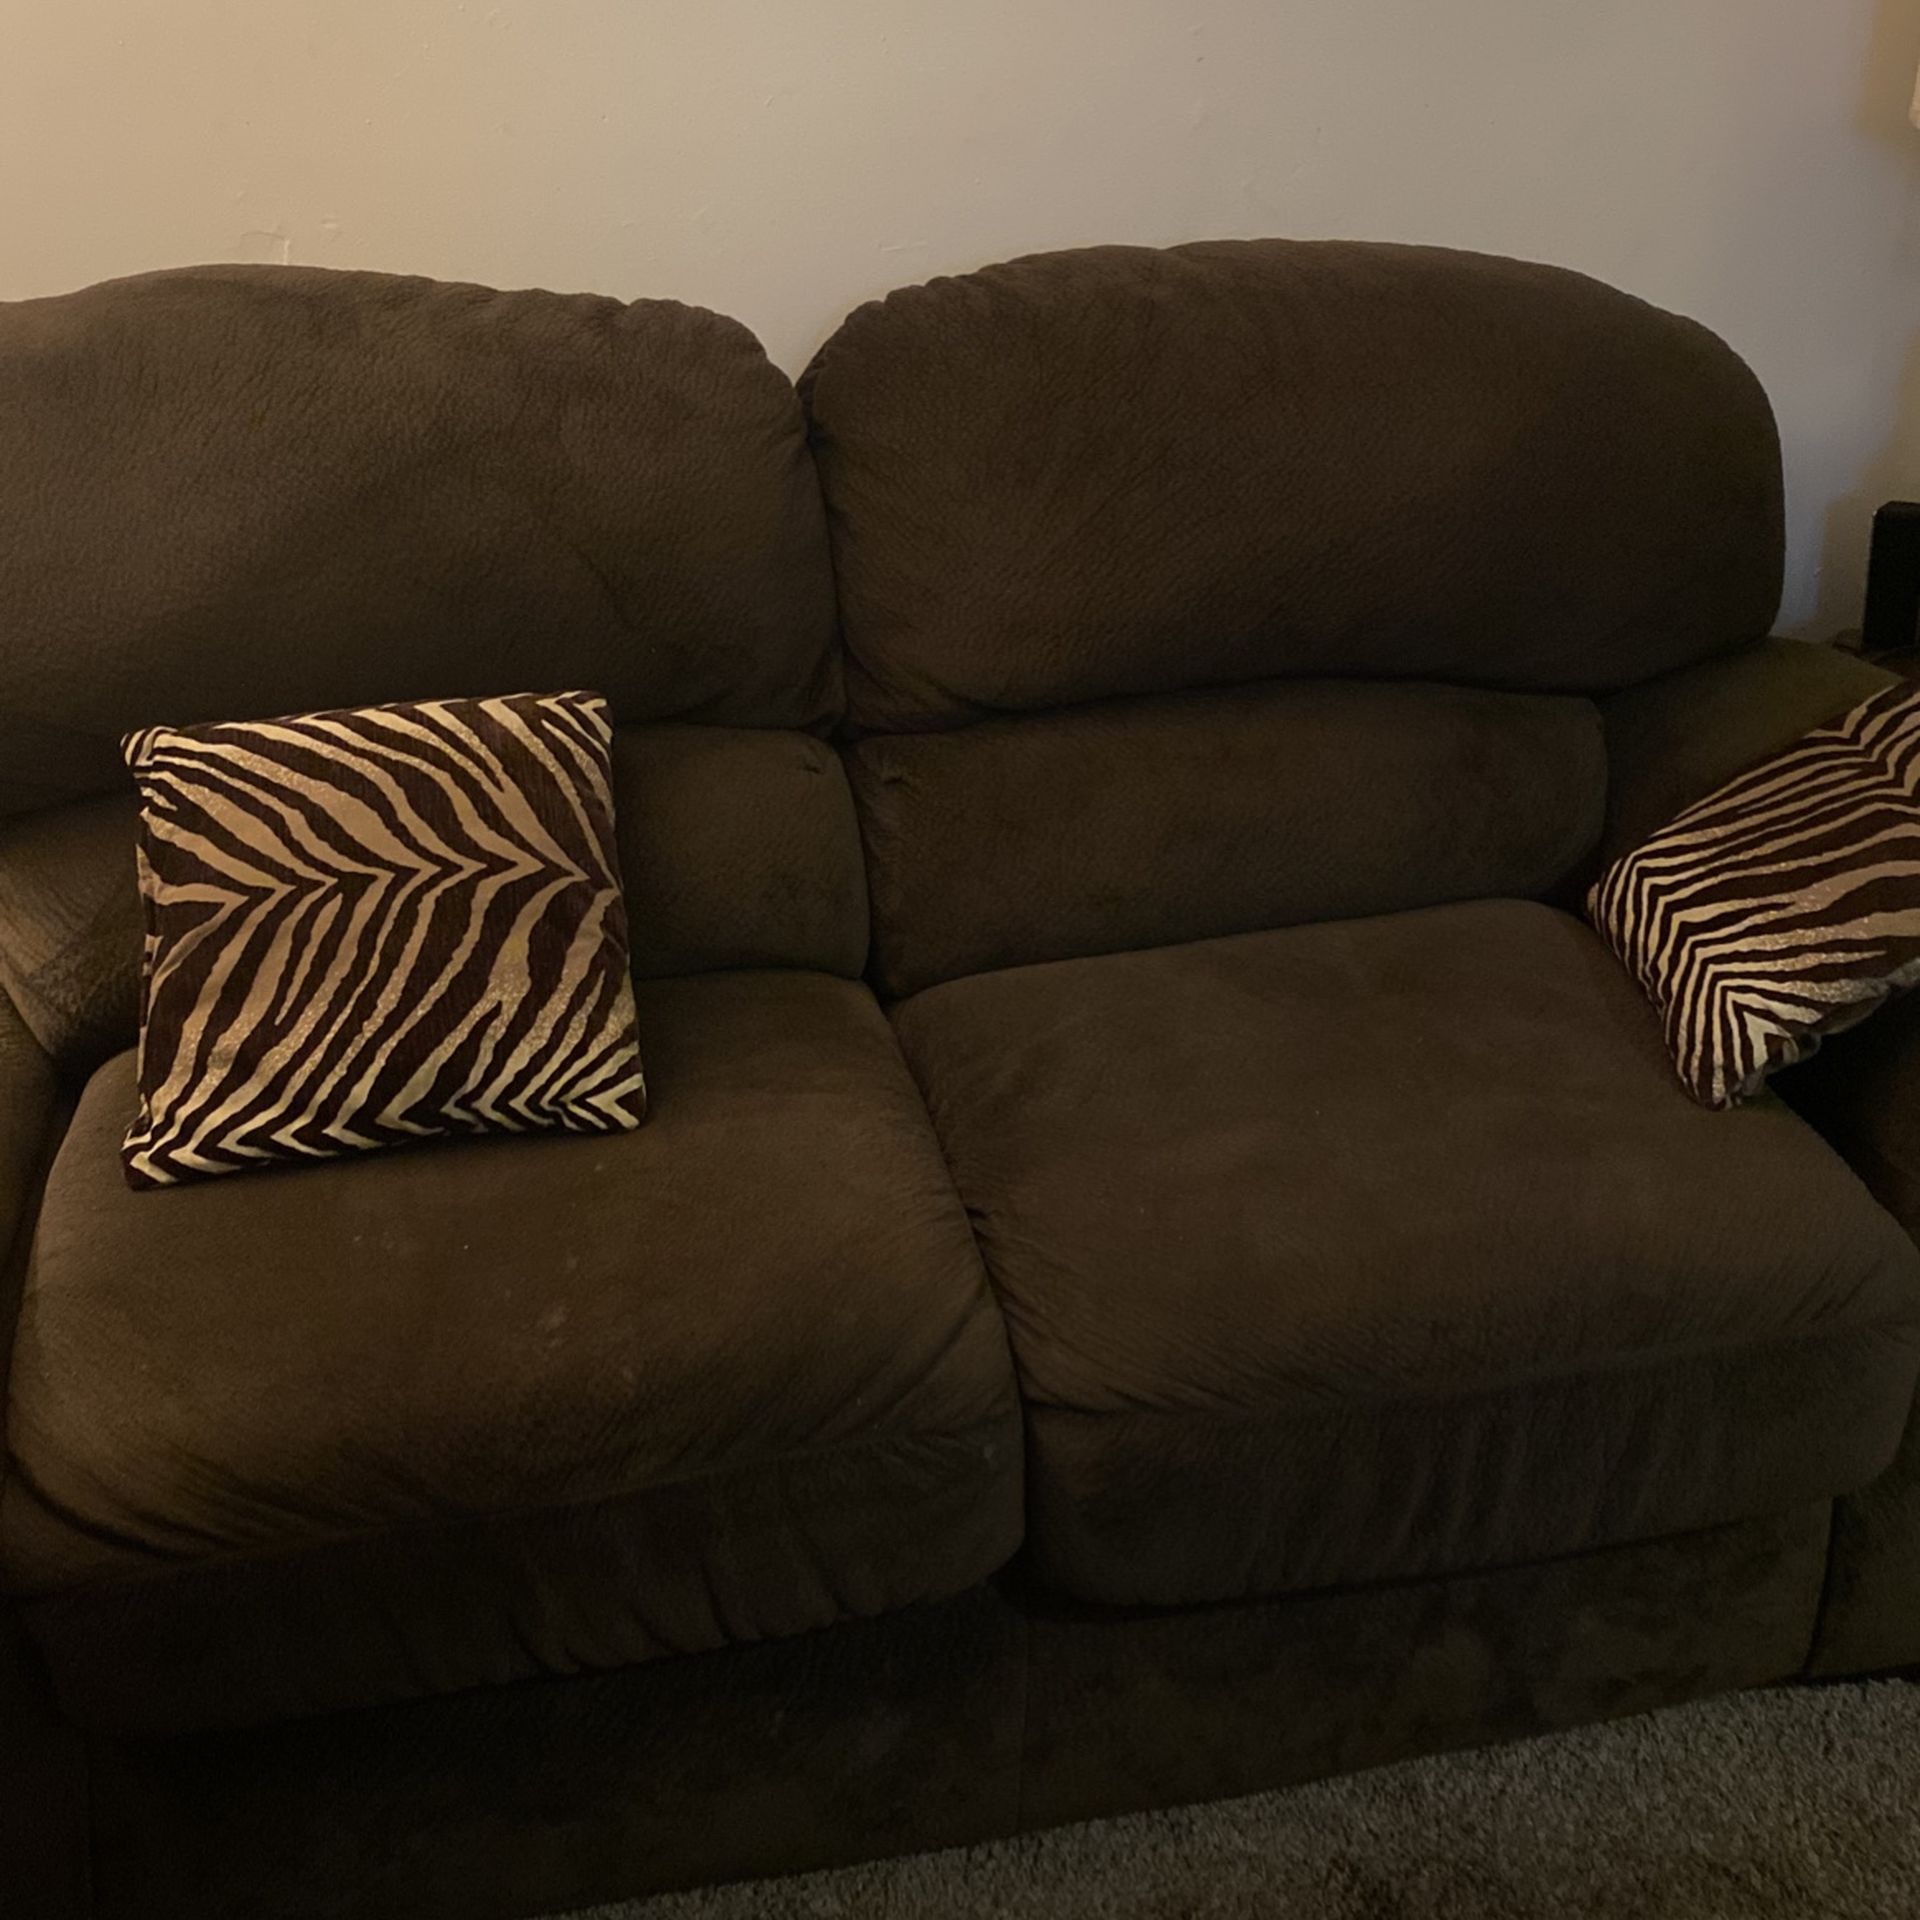 I am selling couch loveseat 65 inch TV kitchen table with four chairs shoot me a price